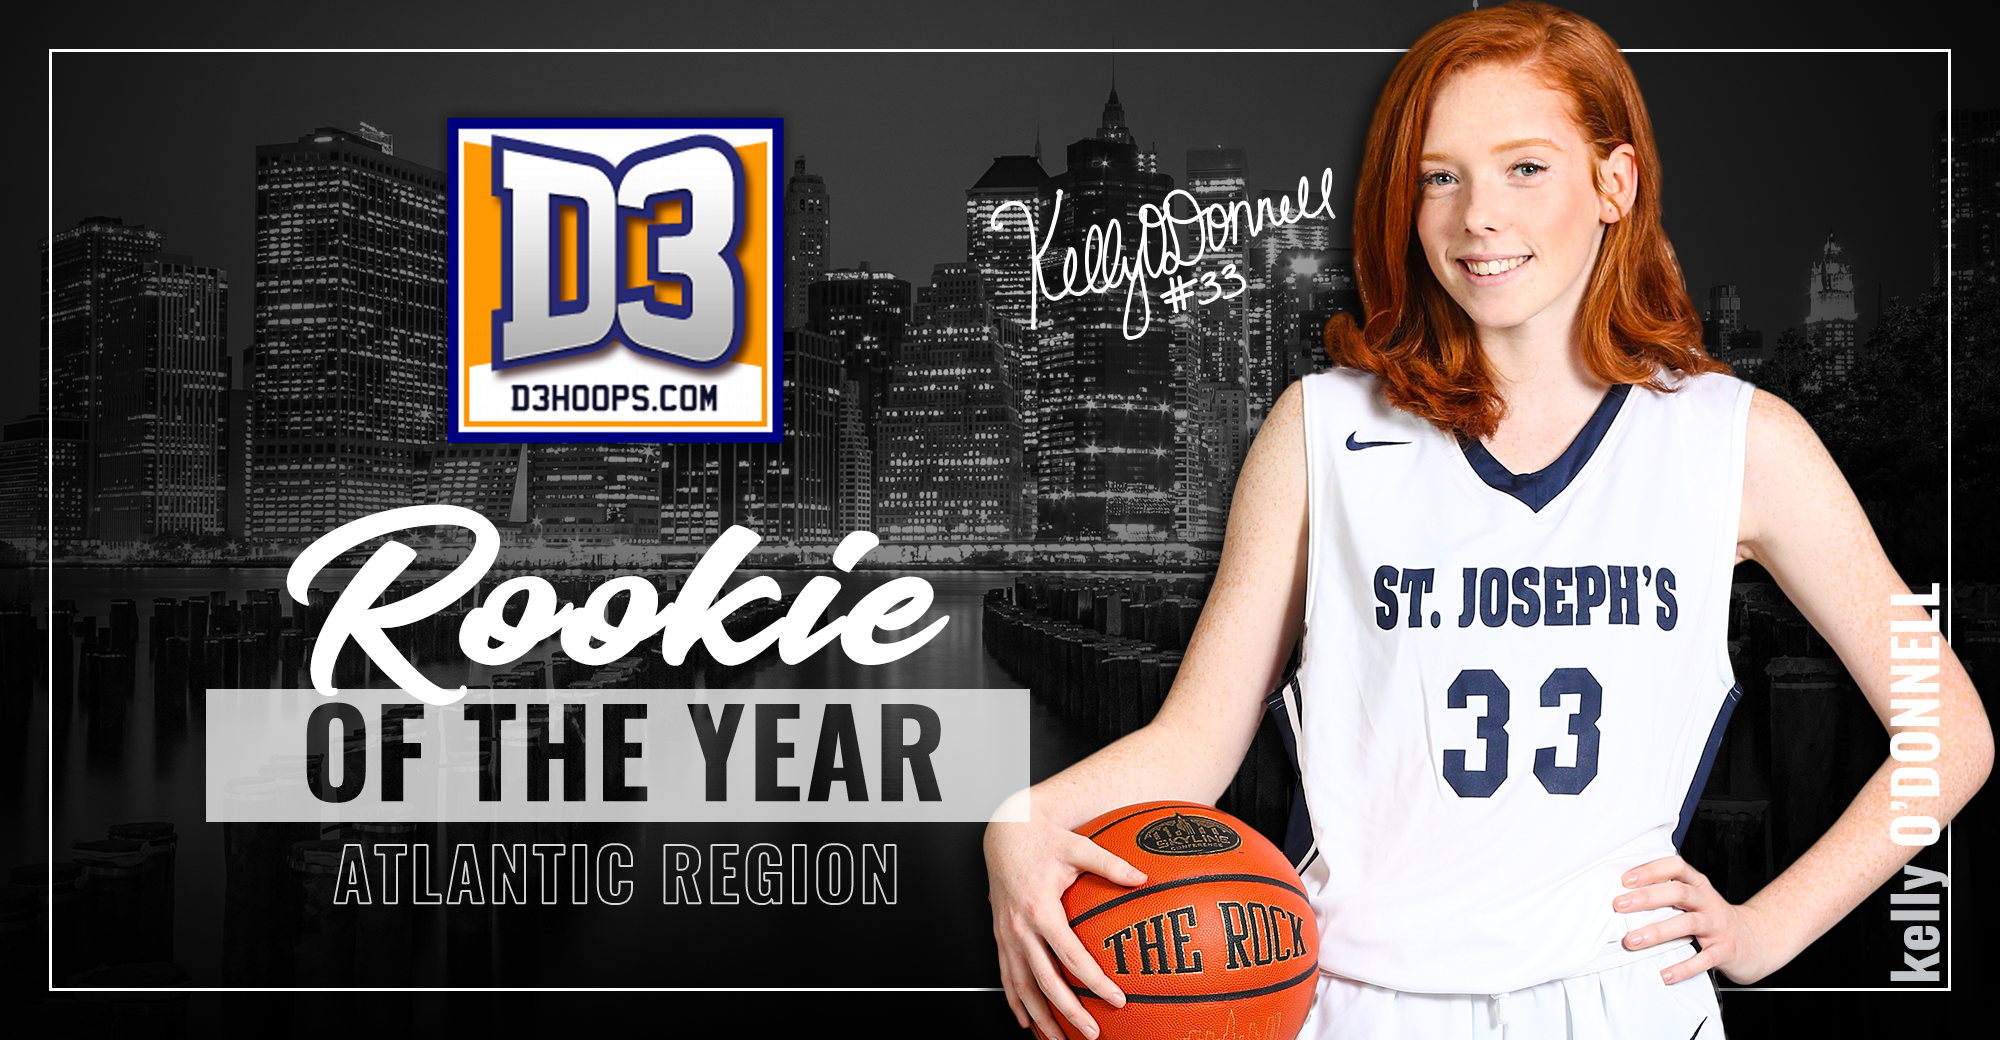 O'Donnell Named D3hoops.com Atlantic Region Rookie of the Year